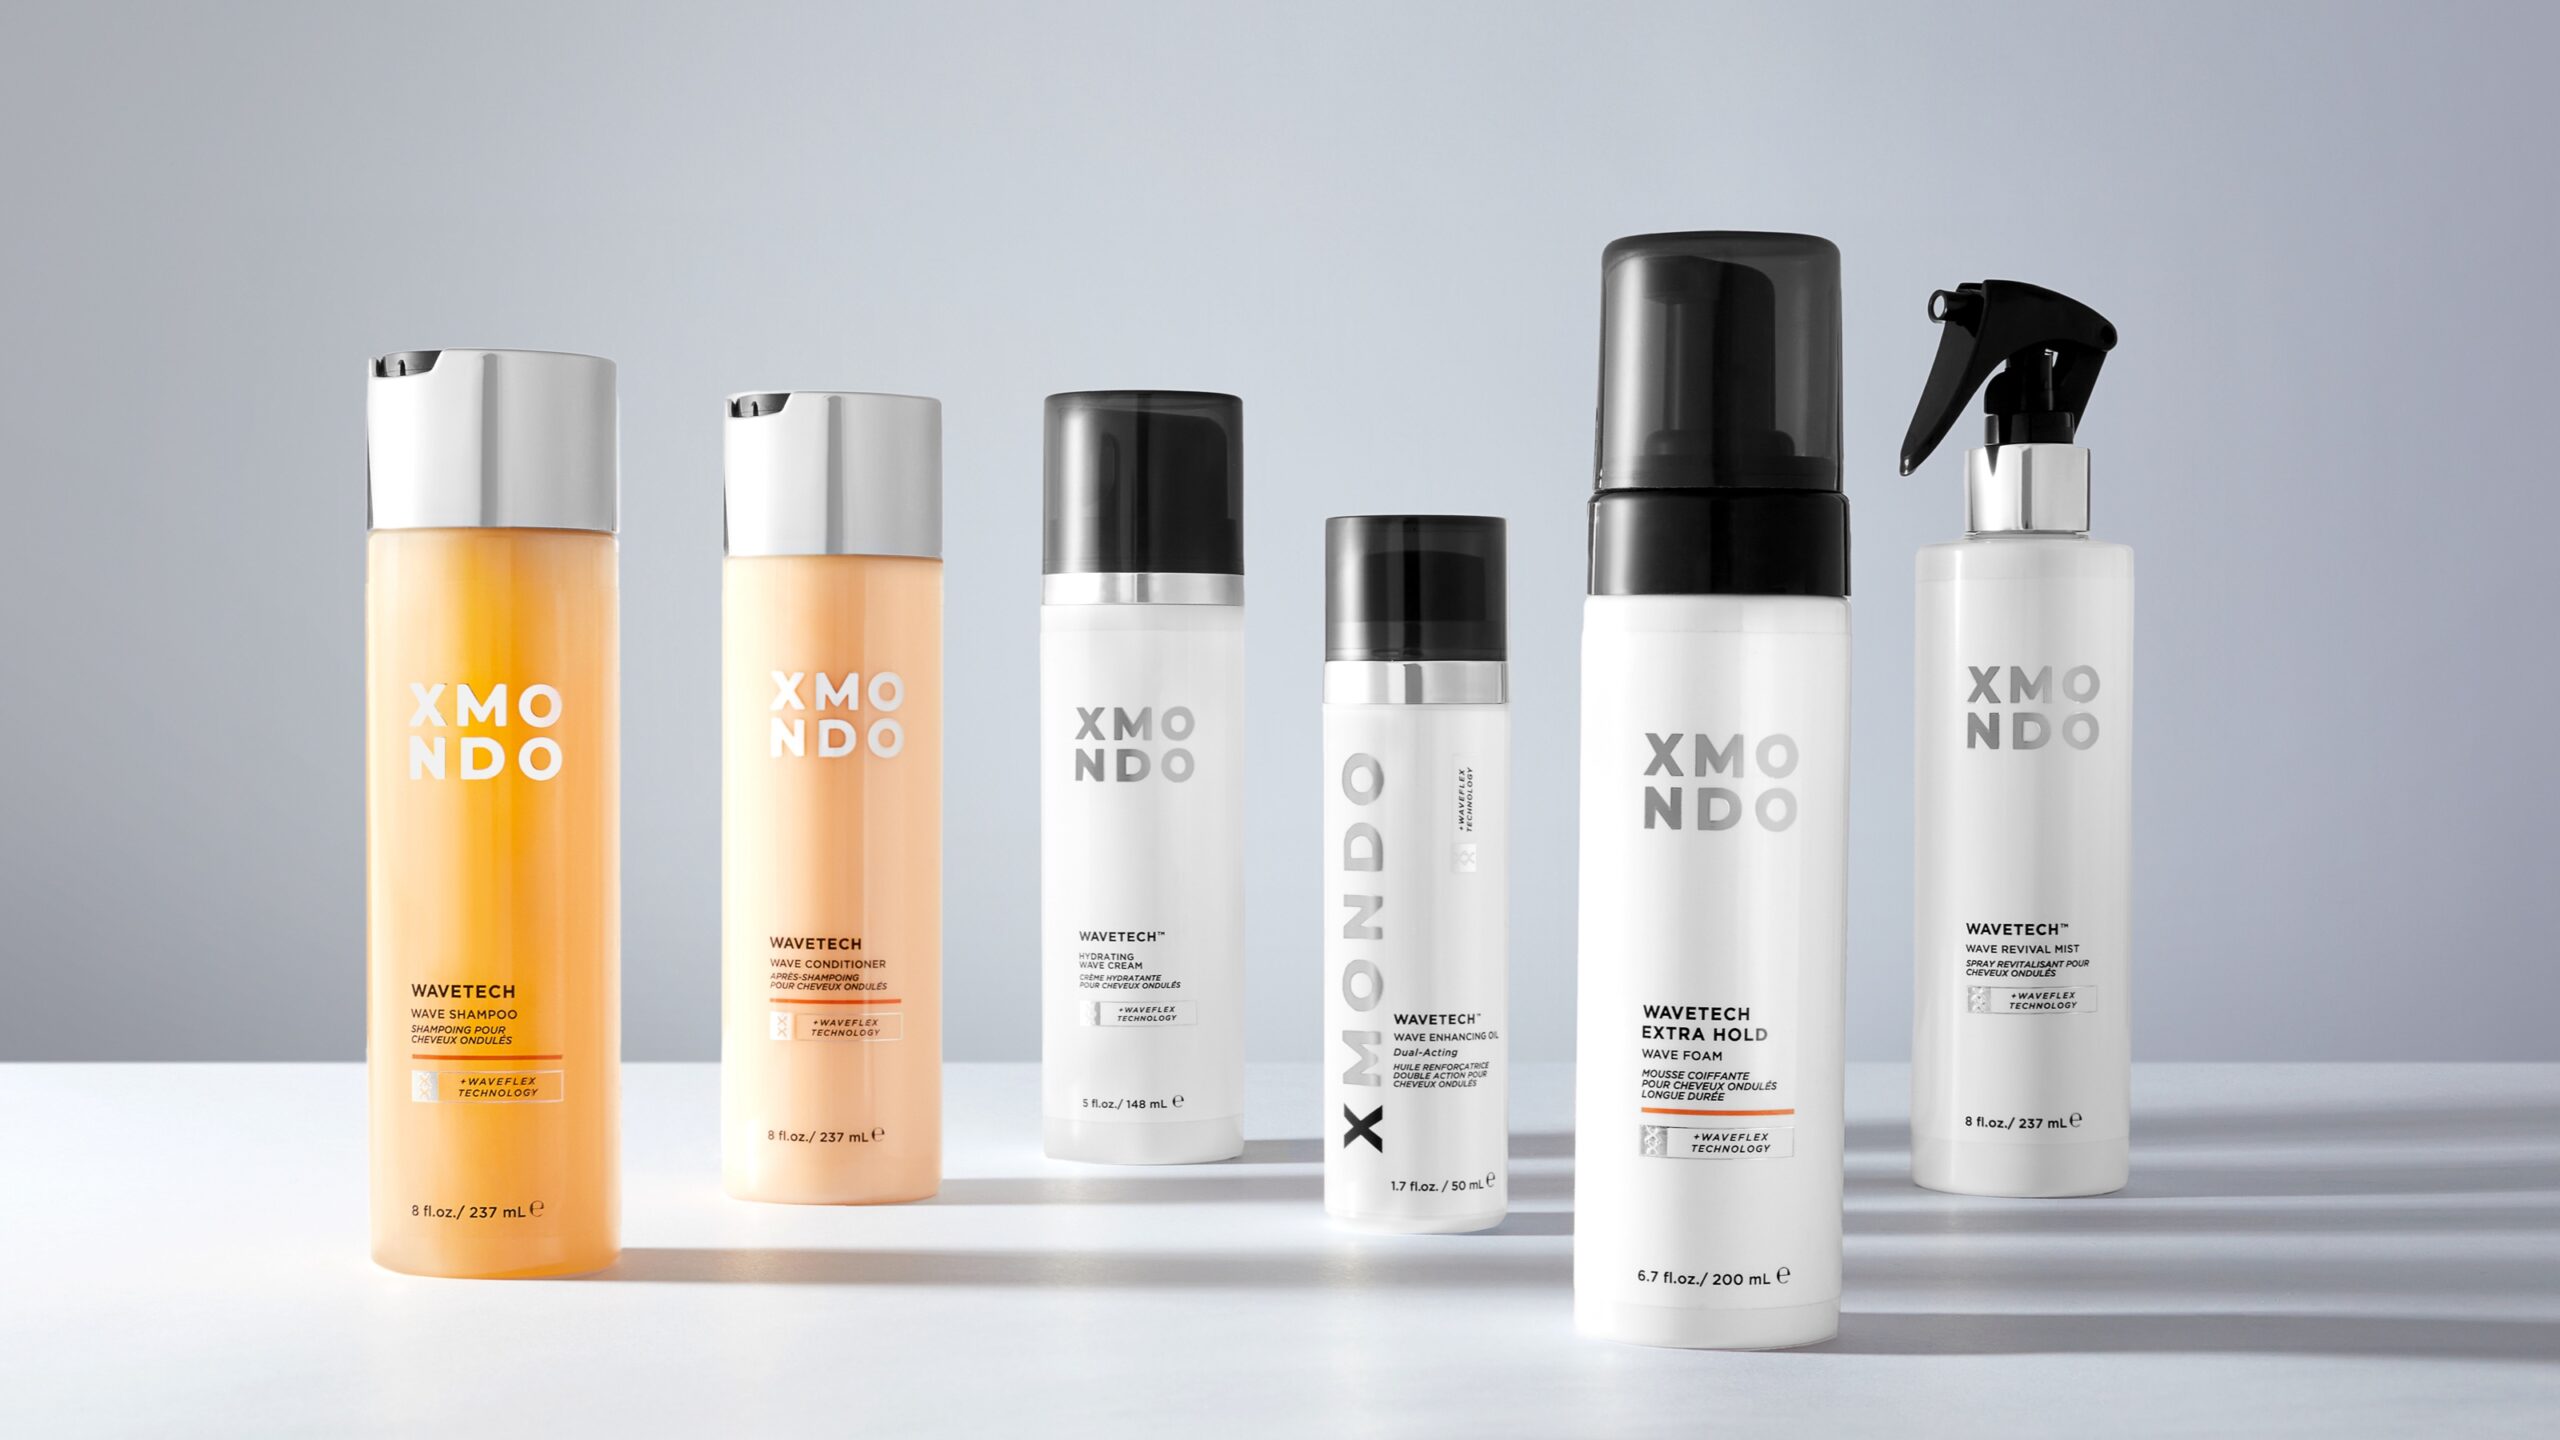 Six haircare products lined up alongside each other